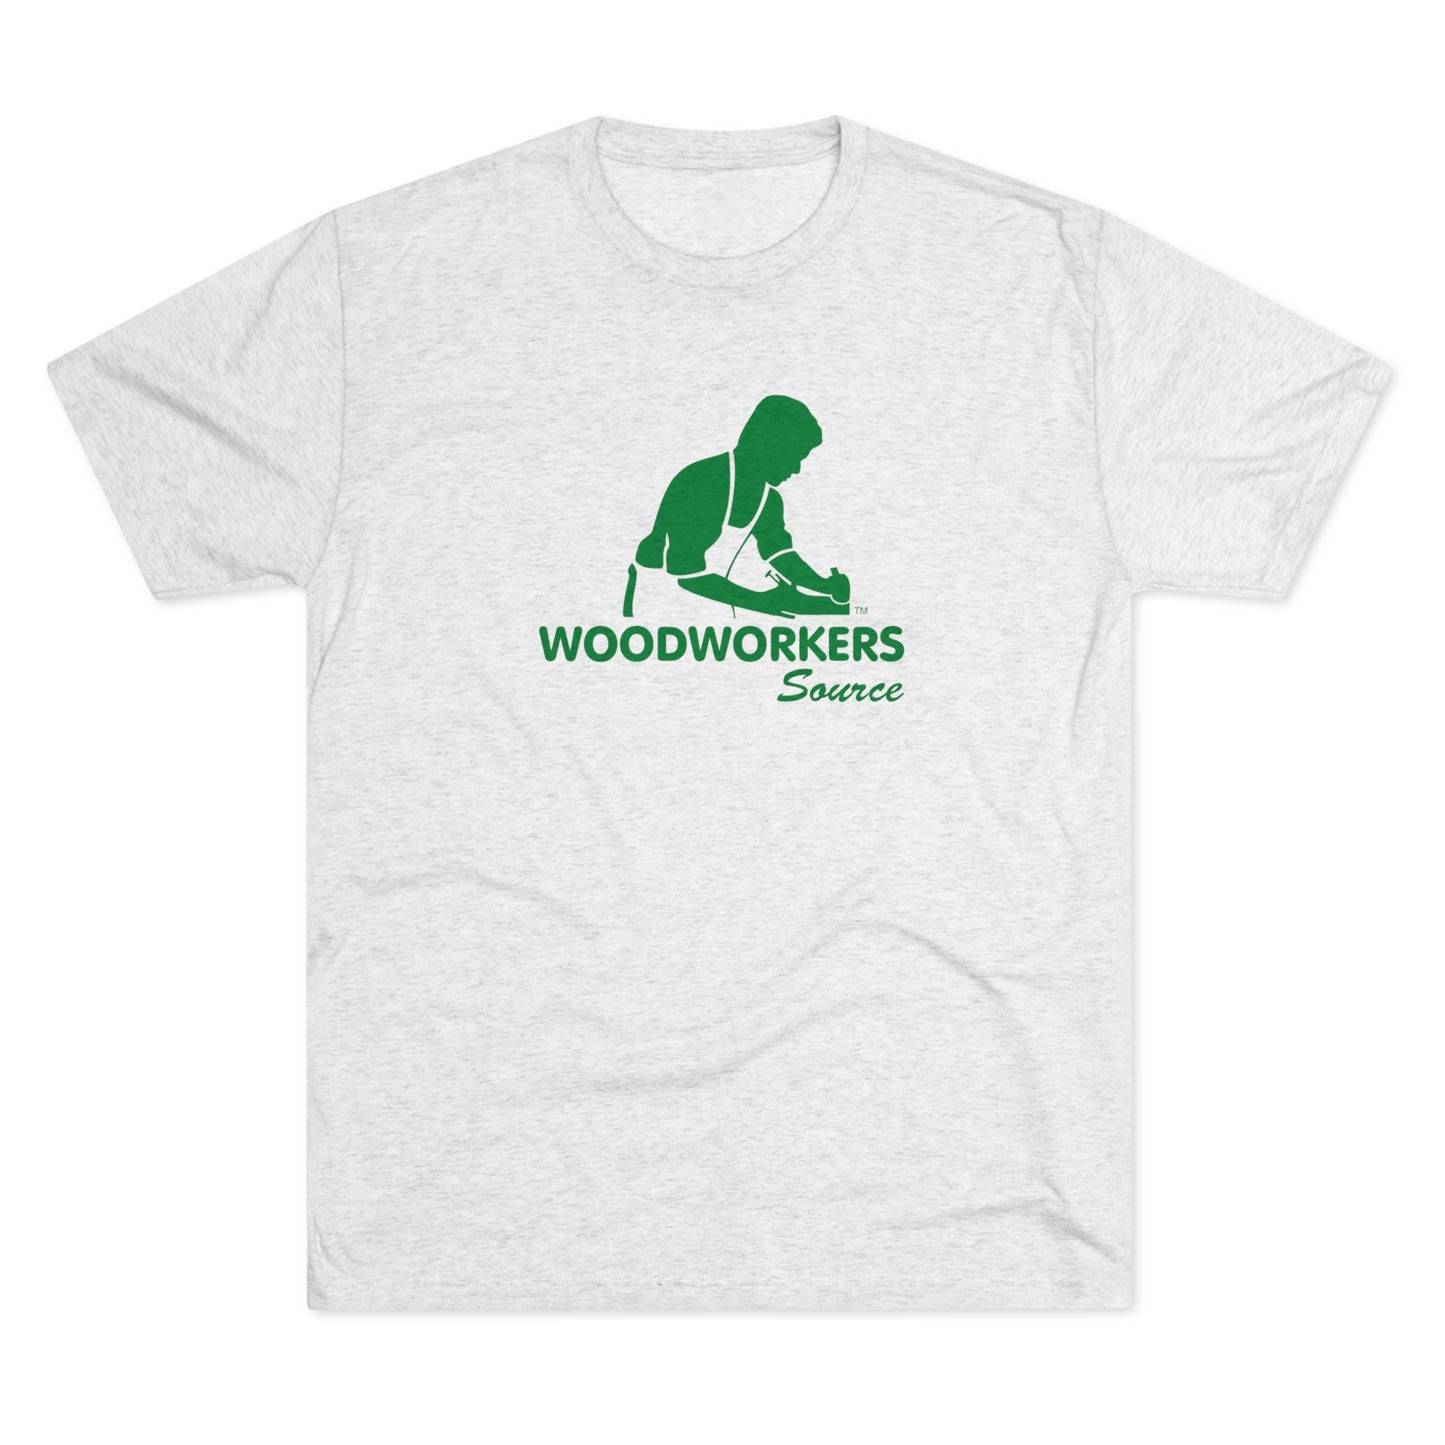 Woodworkers Source Soft Tri-Blend Crew Tee - Front Logo